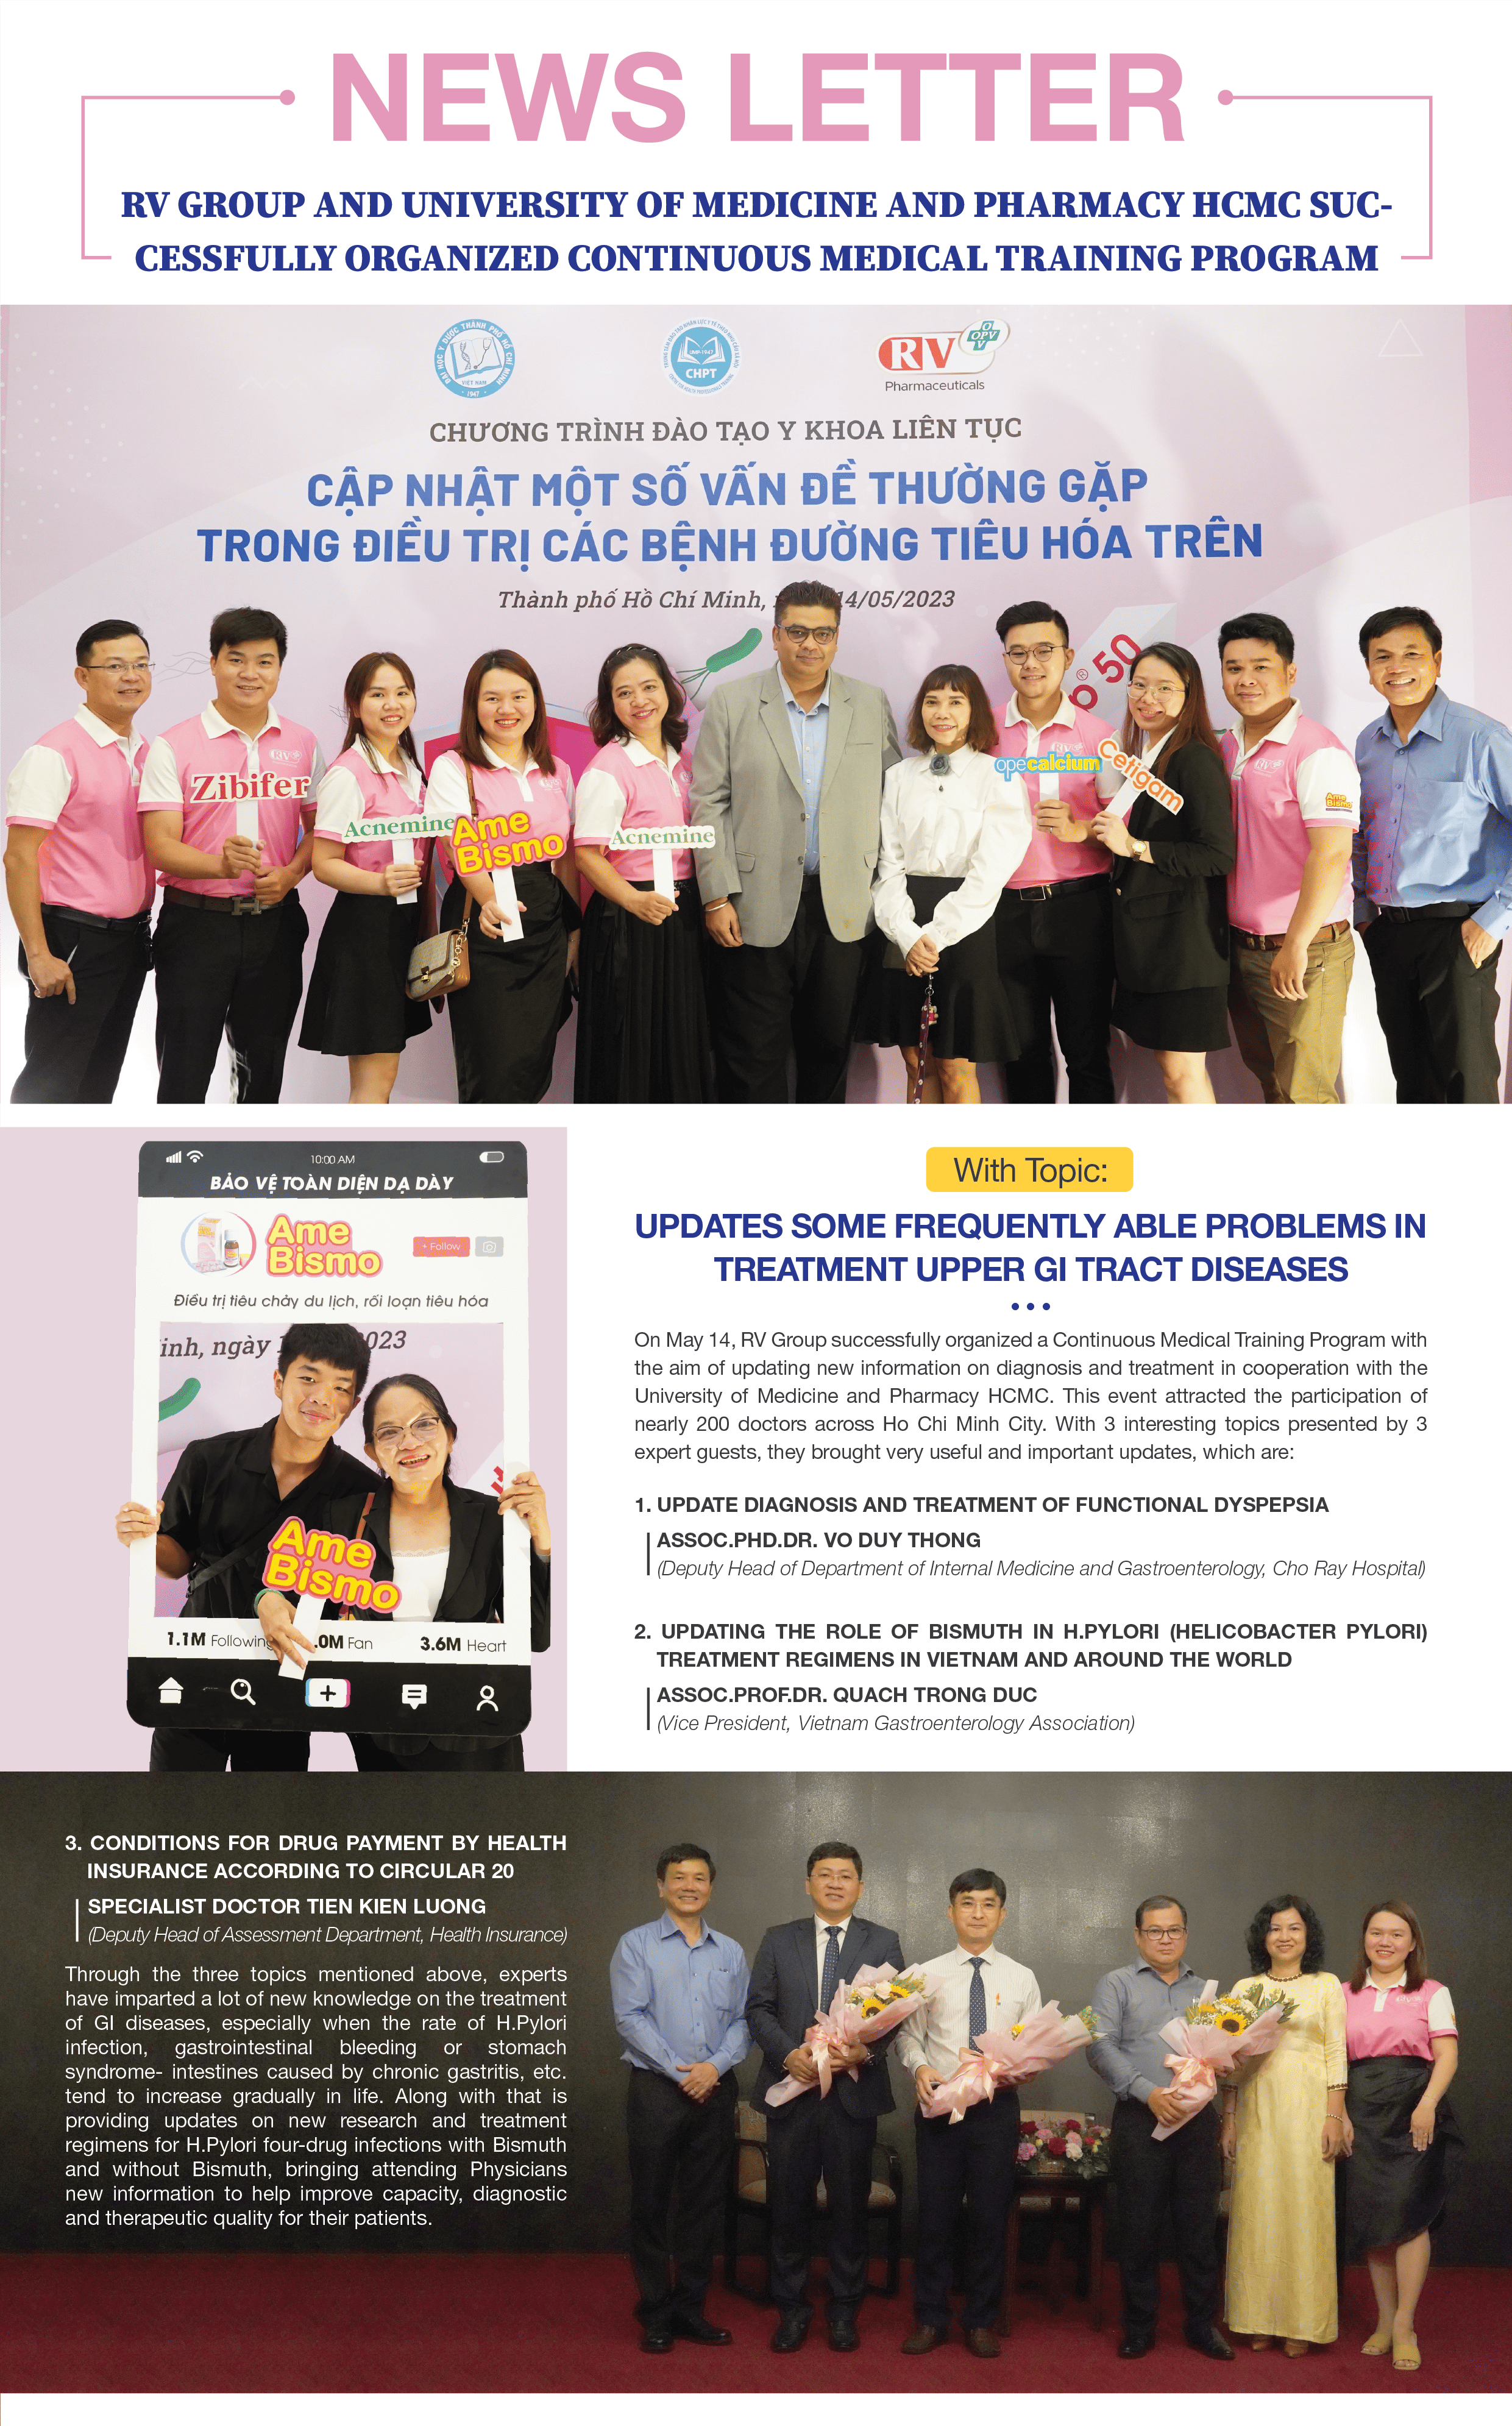 RV GROUP AND UNIVERSITY OF MEDICINE AND PHARMACY HCMC SUCCESSFULLY ORGANIZED CONTINUOUS MEDICAL TRAINING PROGRAM